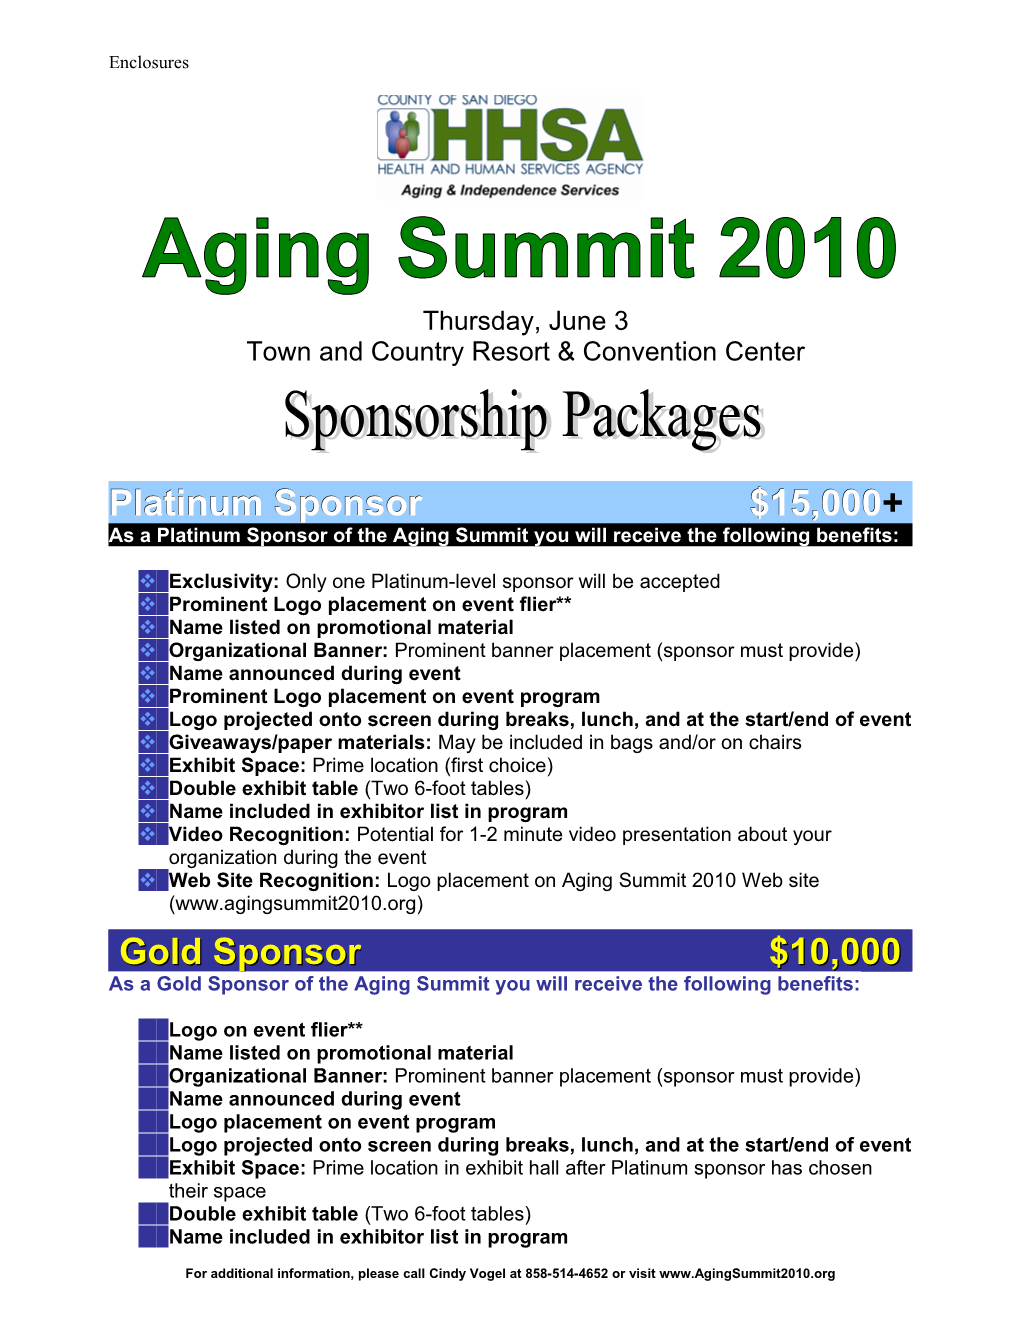 The Aging Summit Is a Unique Event Which Combines Community Outreach and Education With